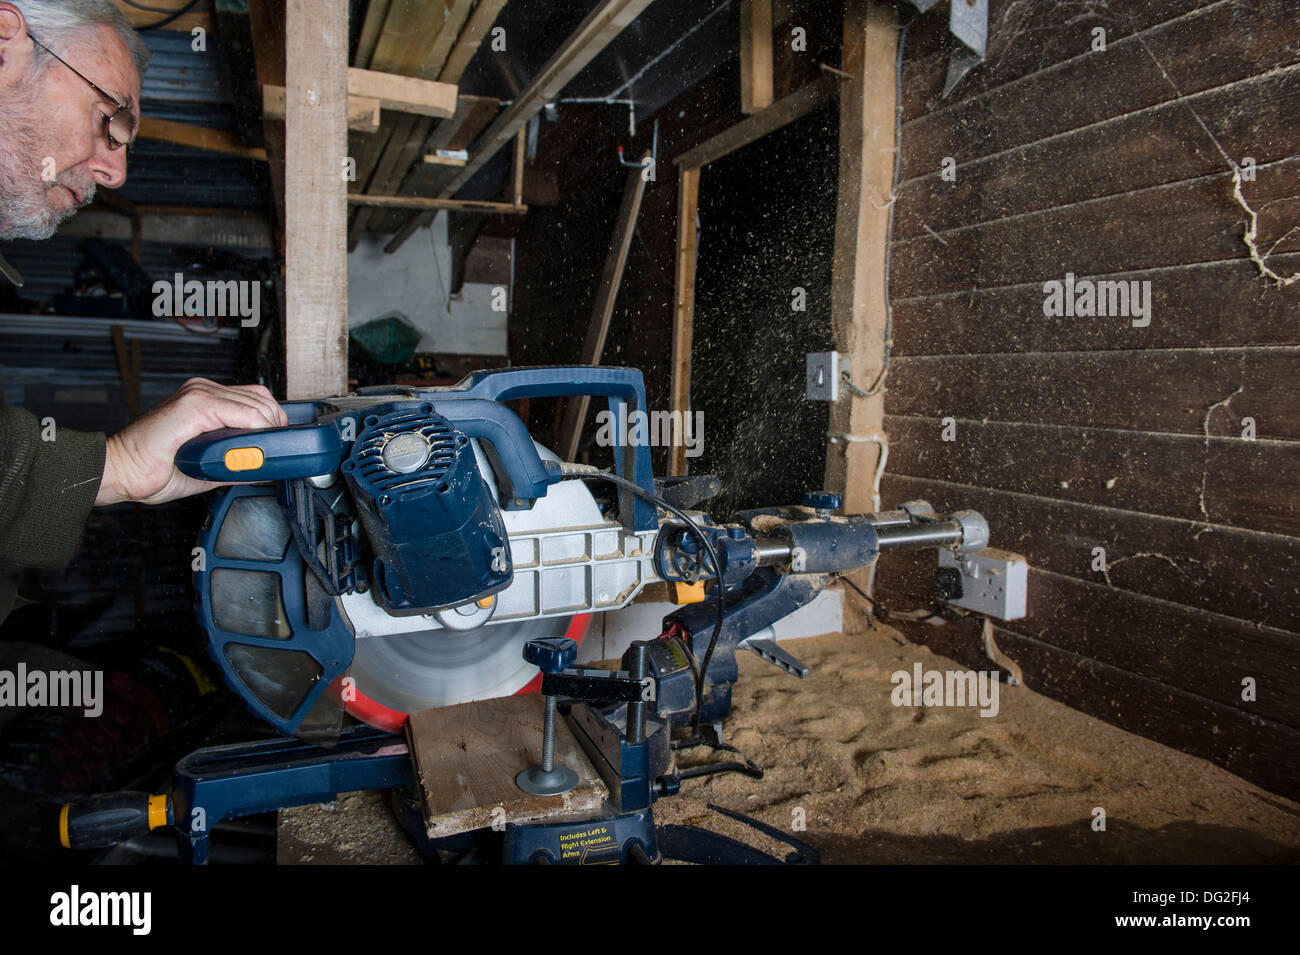 A sliding compound mitre saw, in a workshop, cutting timber with sawdust being ejected from the rear of the saw. Stock Photo